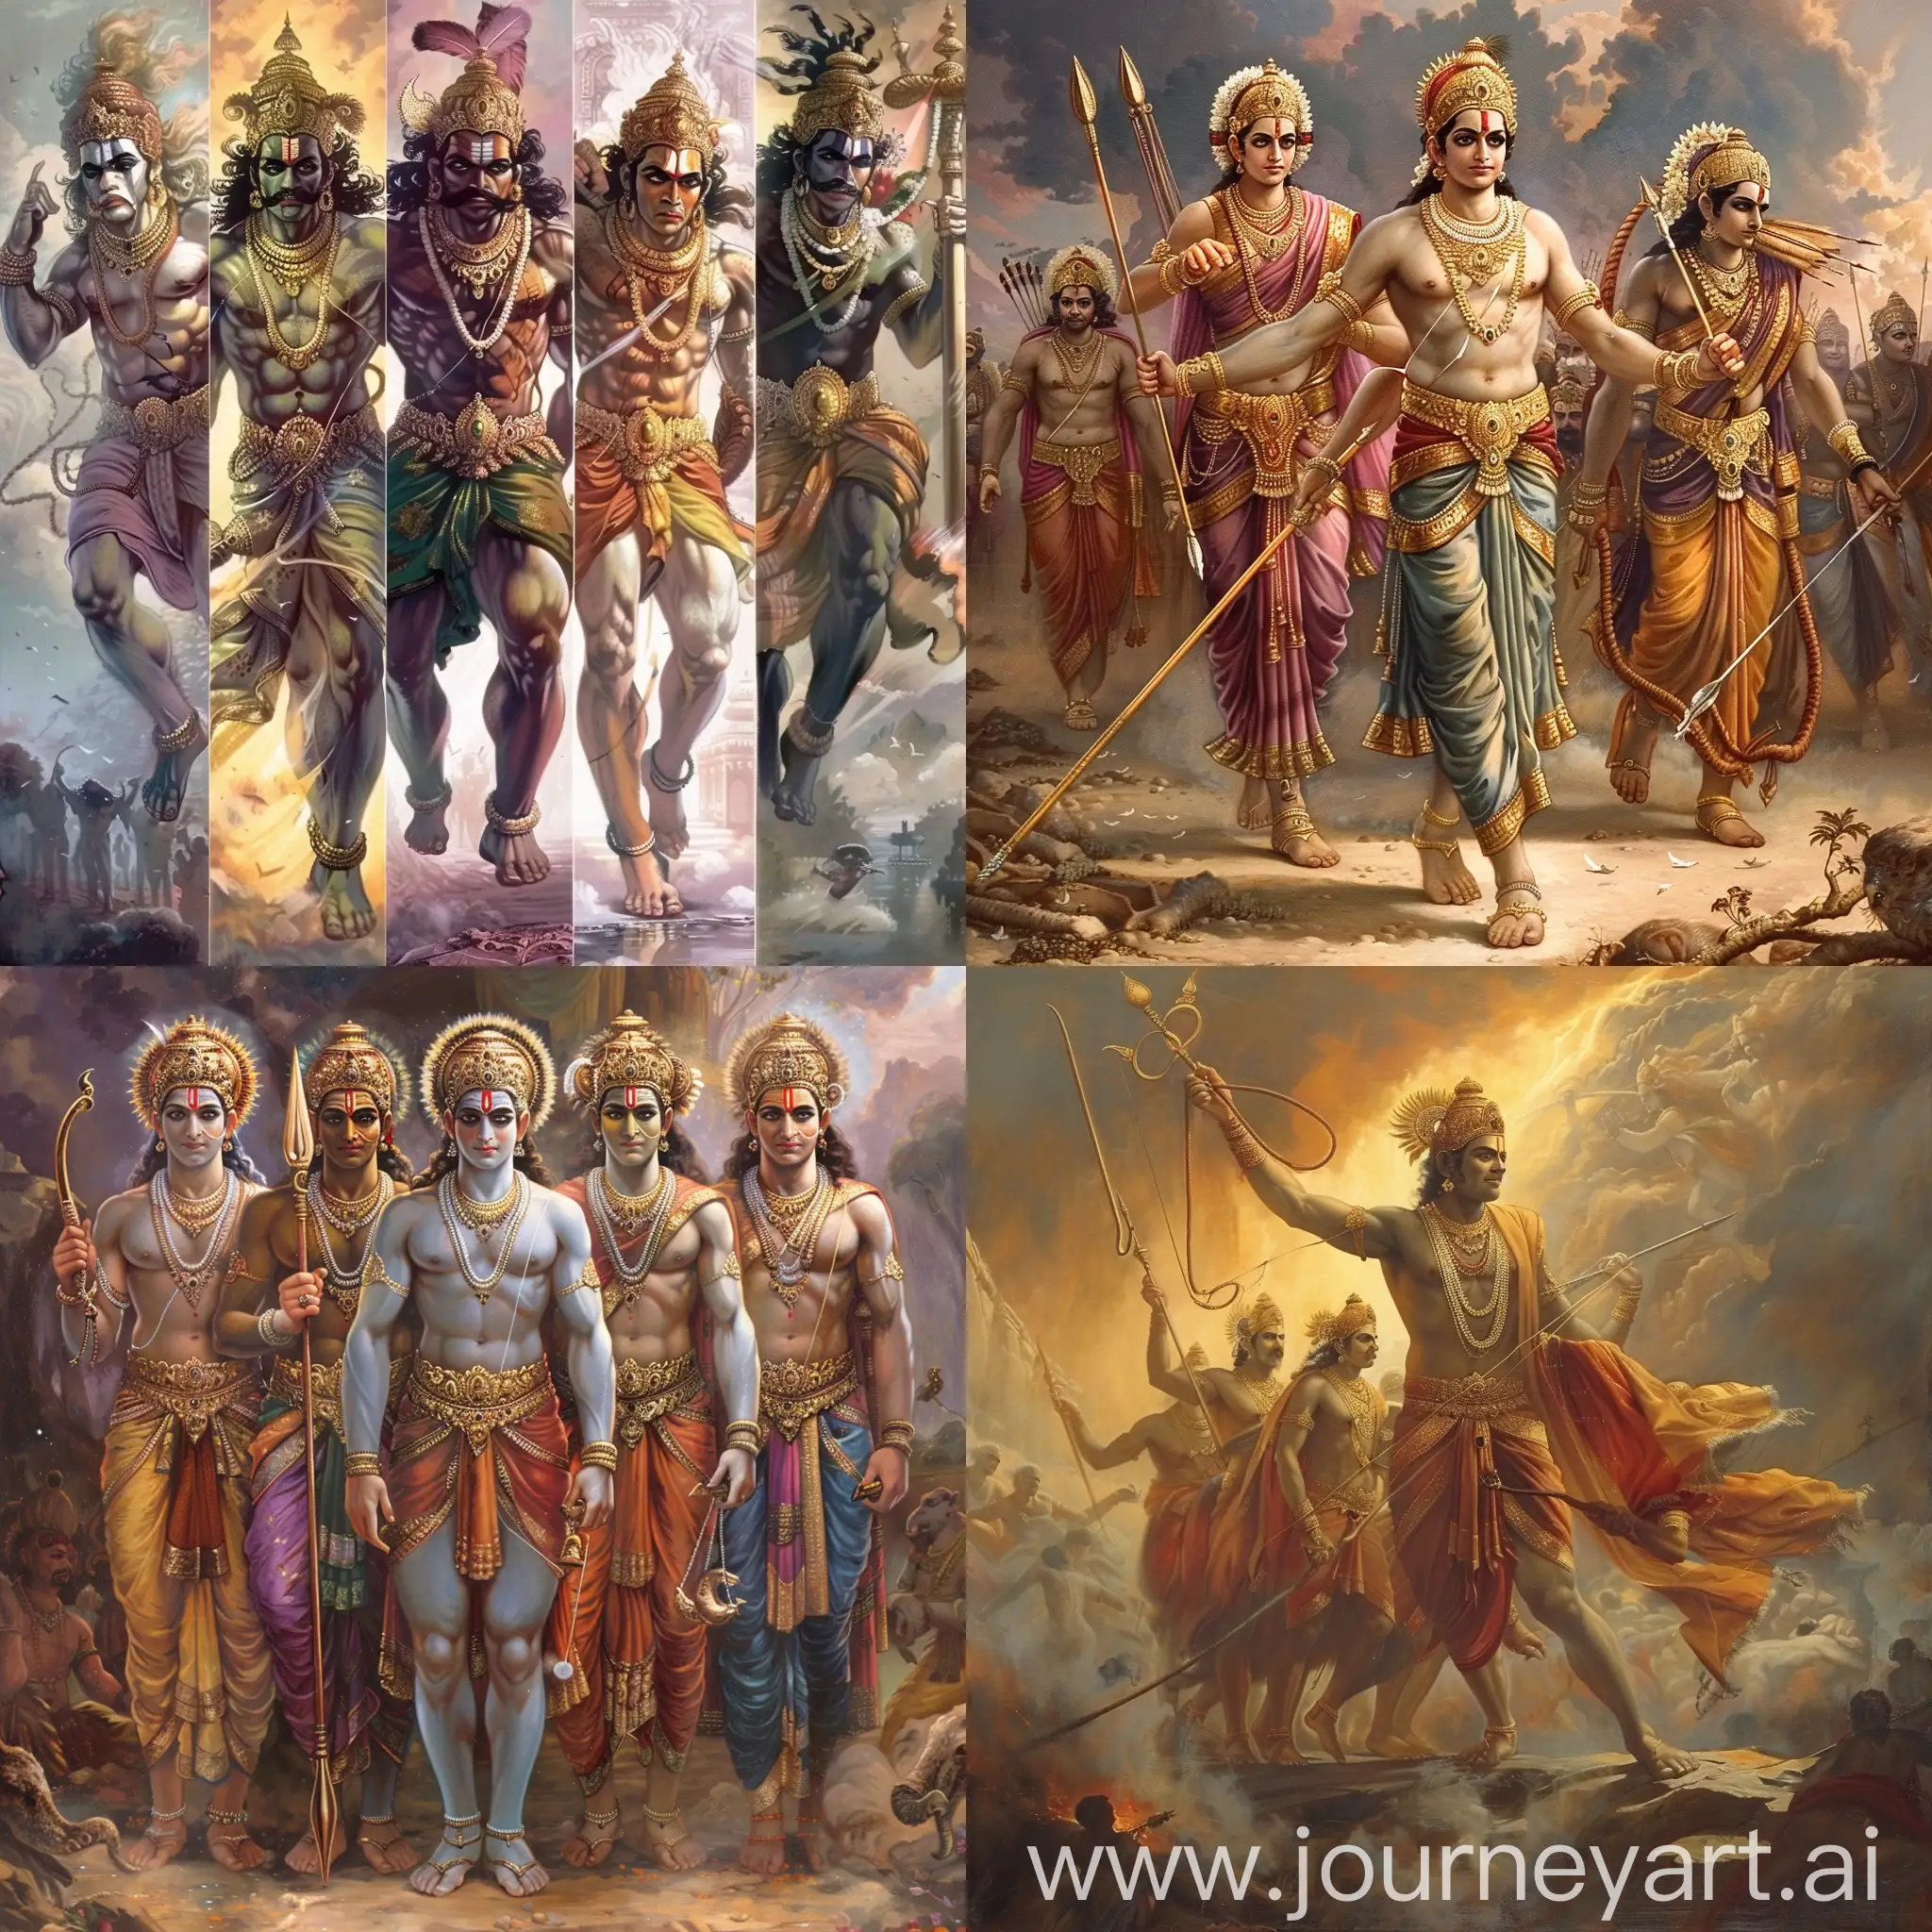 Five-Phases-of-Human-Life-Depicted-from-Ramayana-Epic